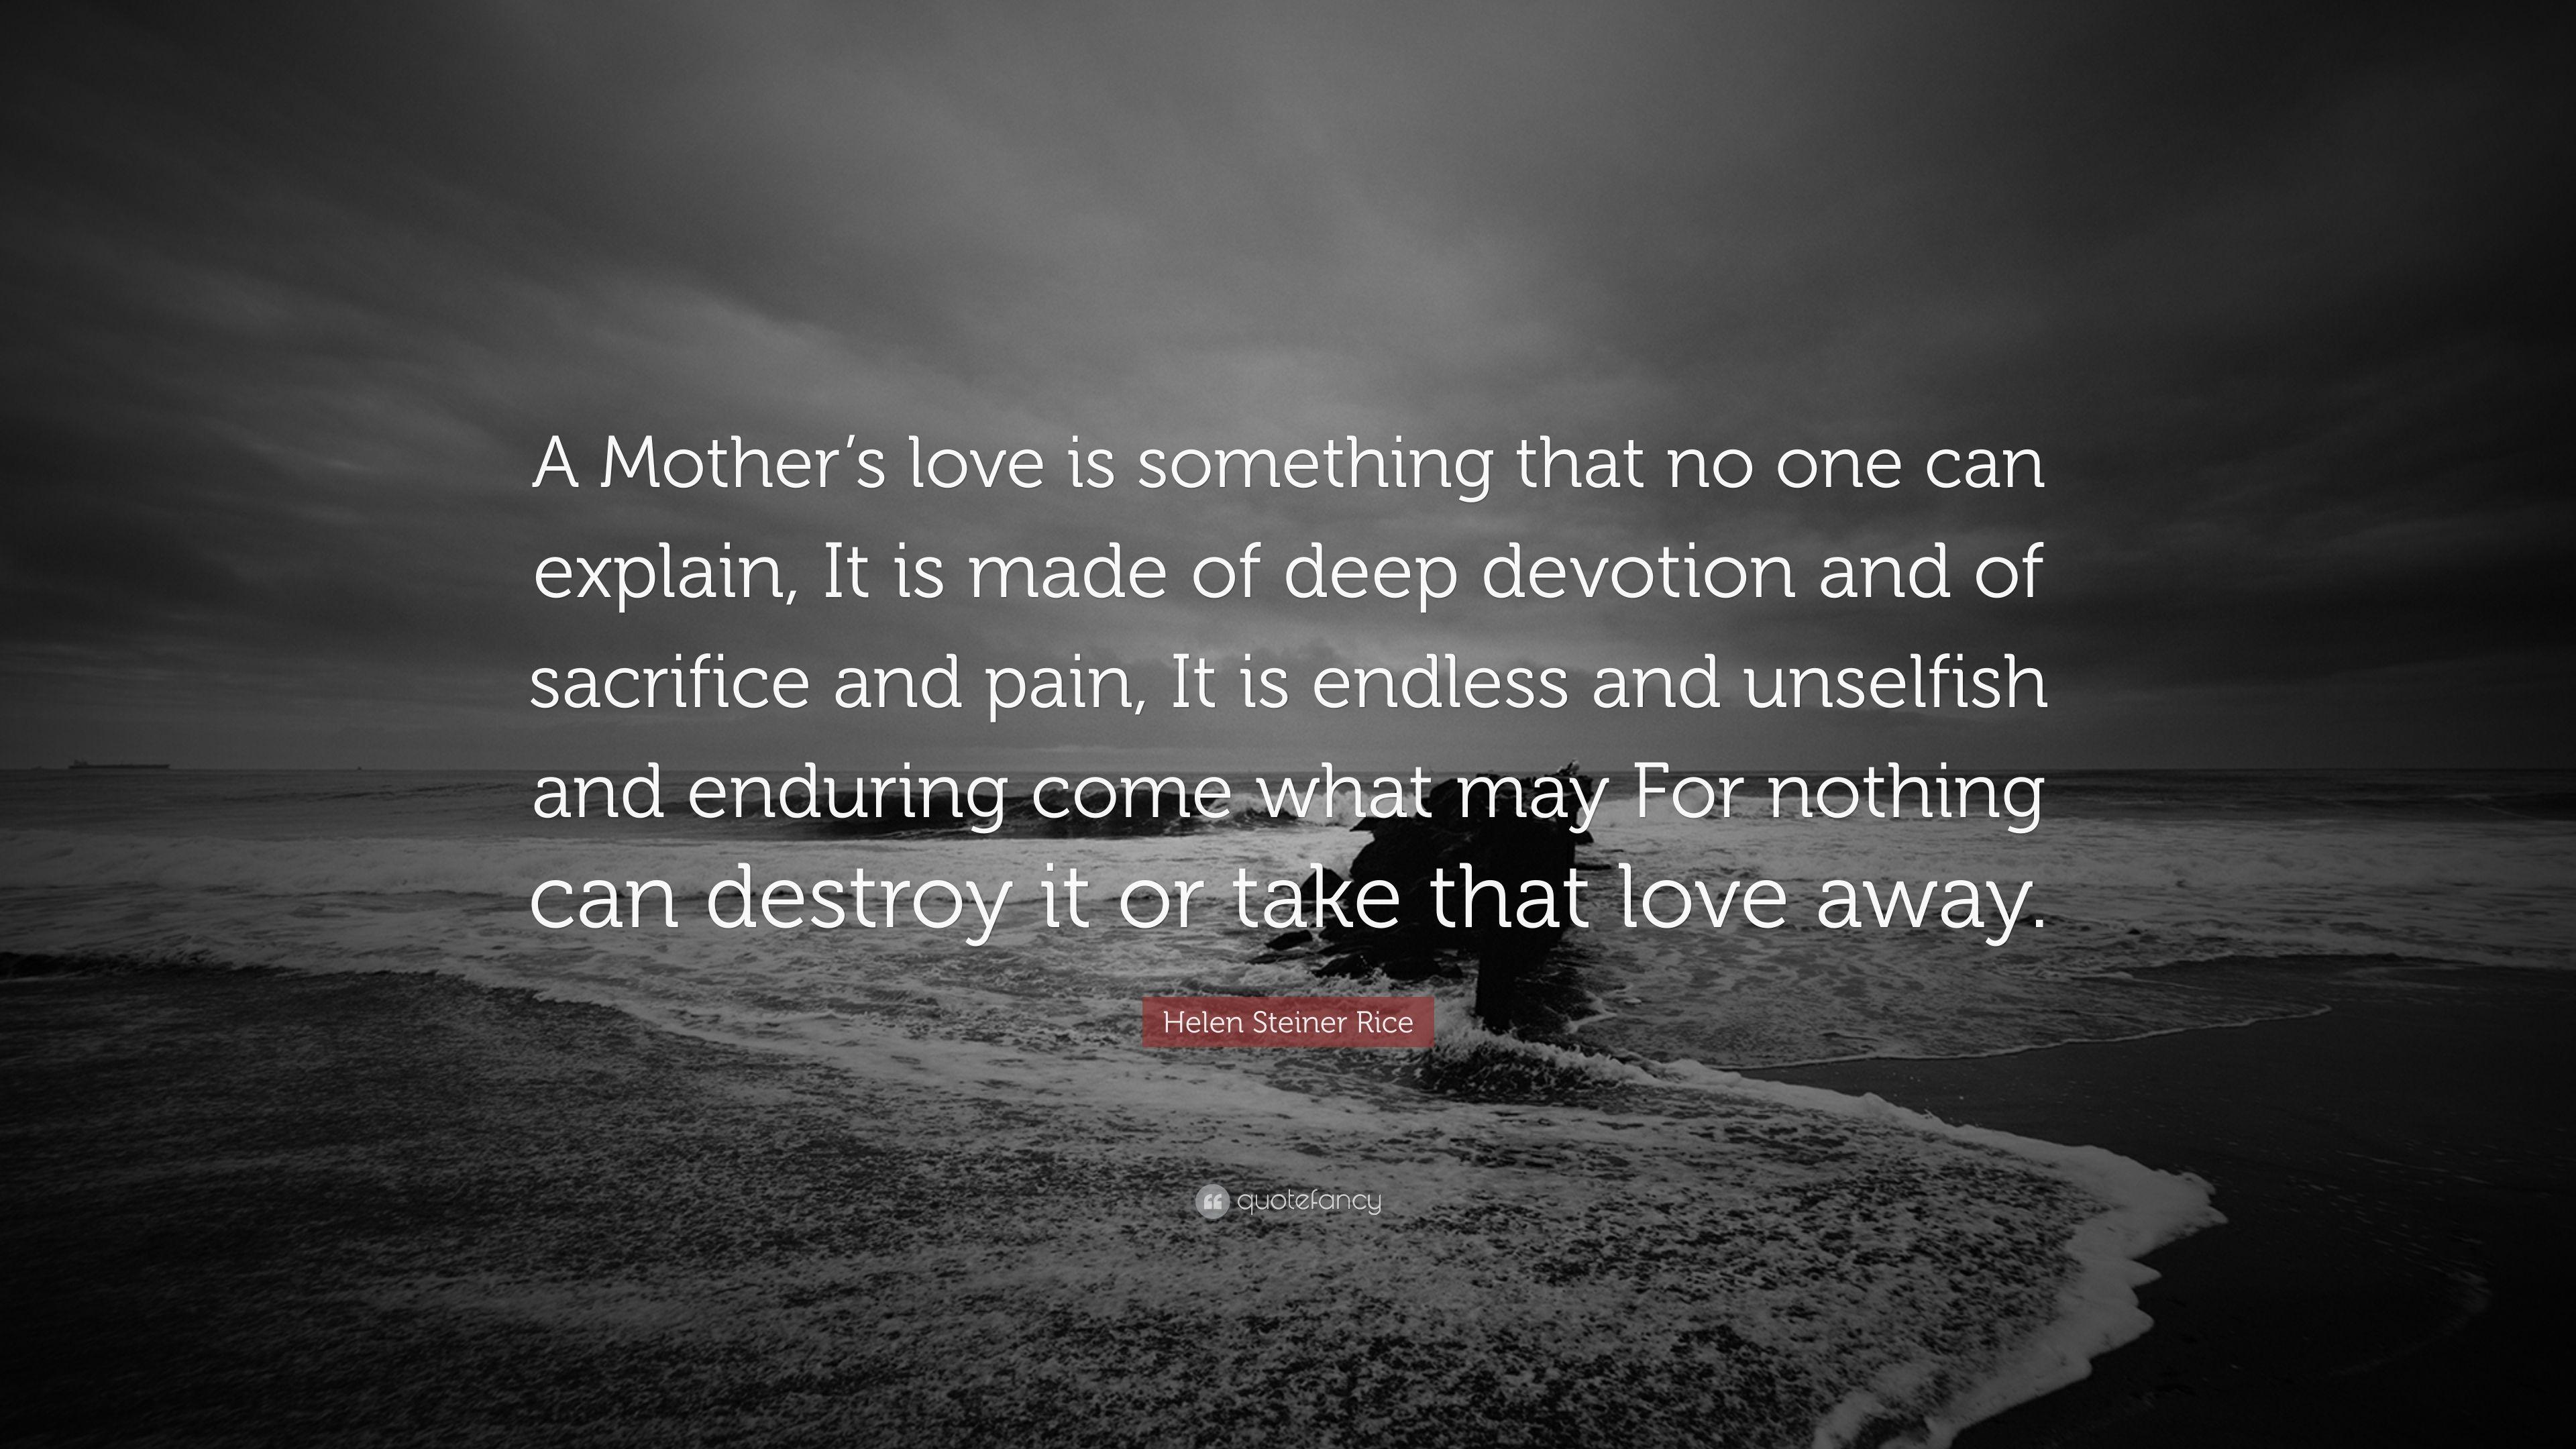 Quotes About Love And Sacrifice Sacrifice Quotes 40 Wallpaper